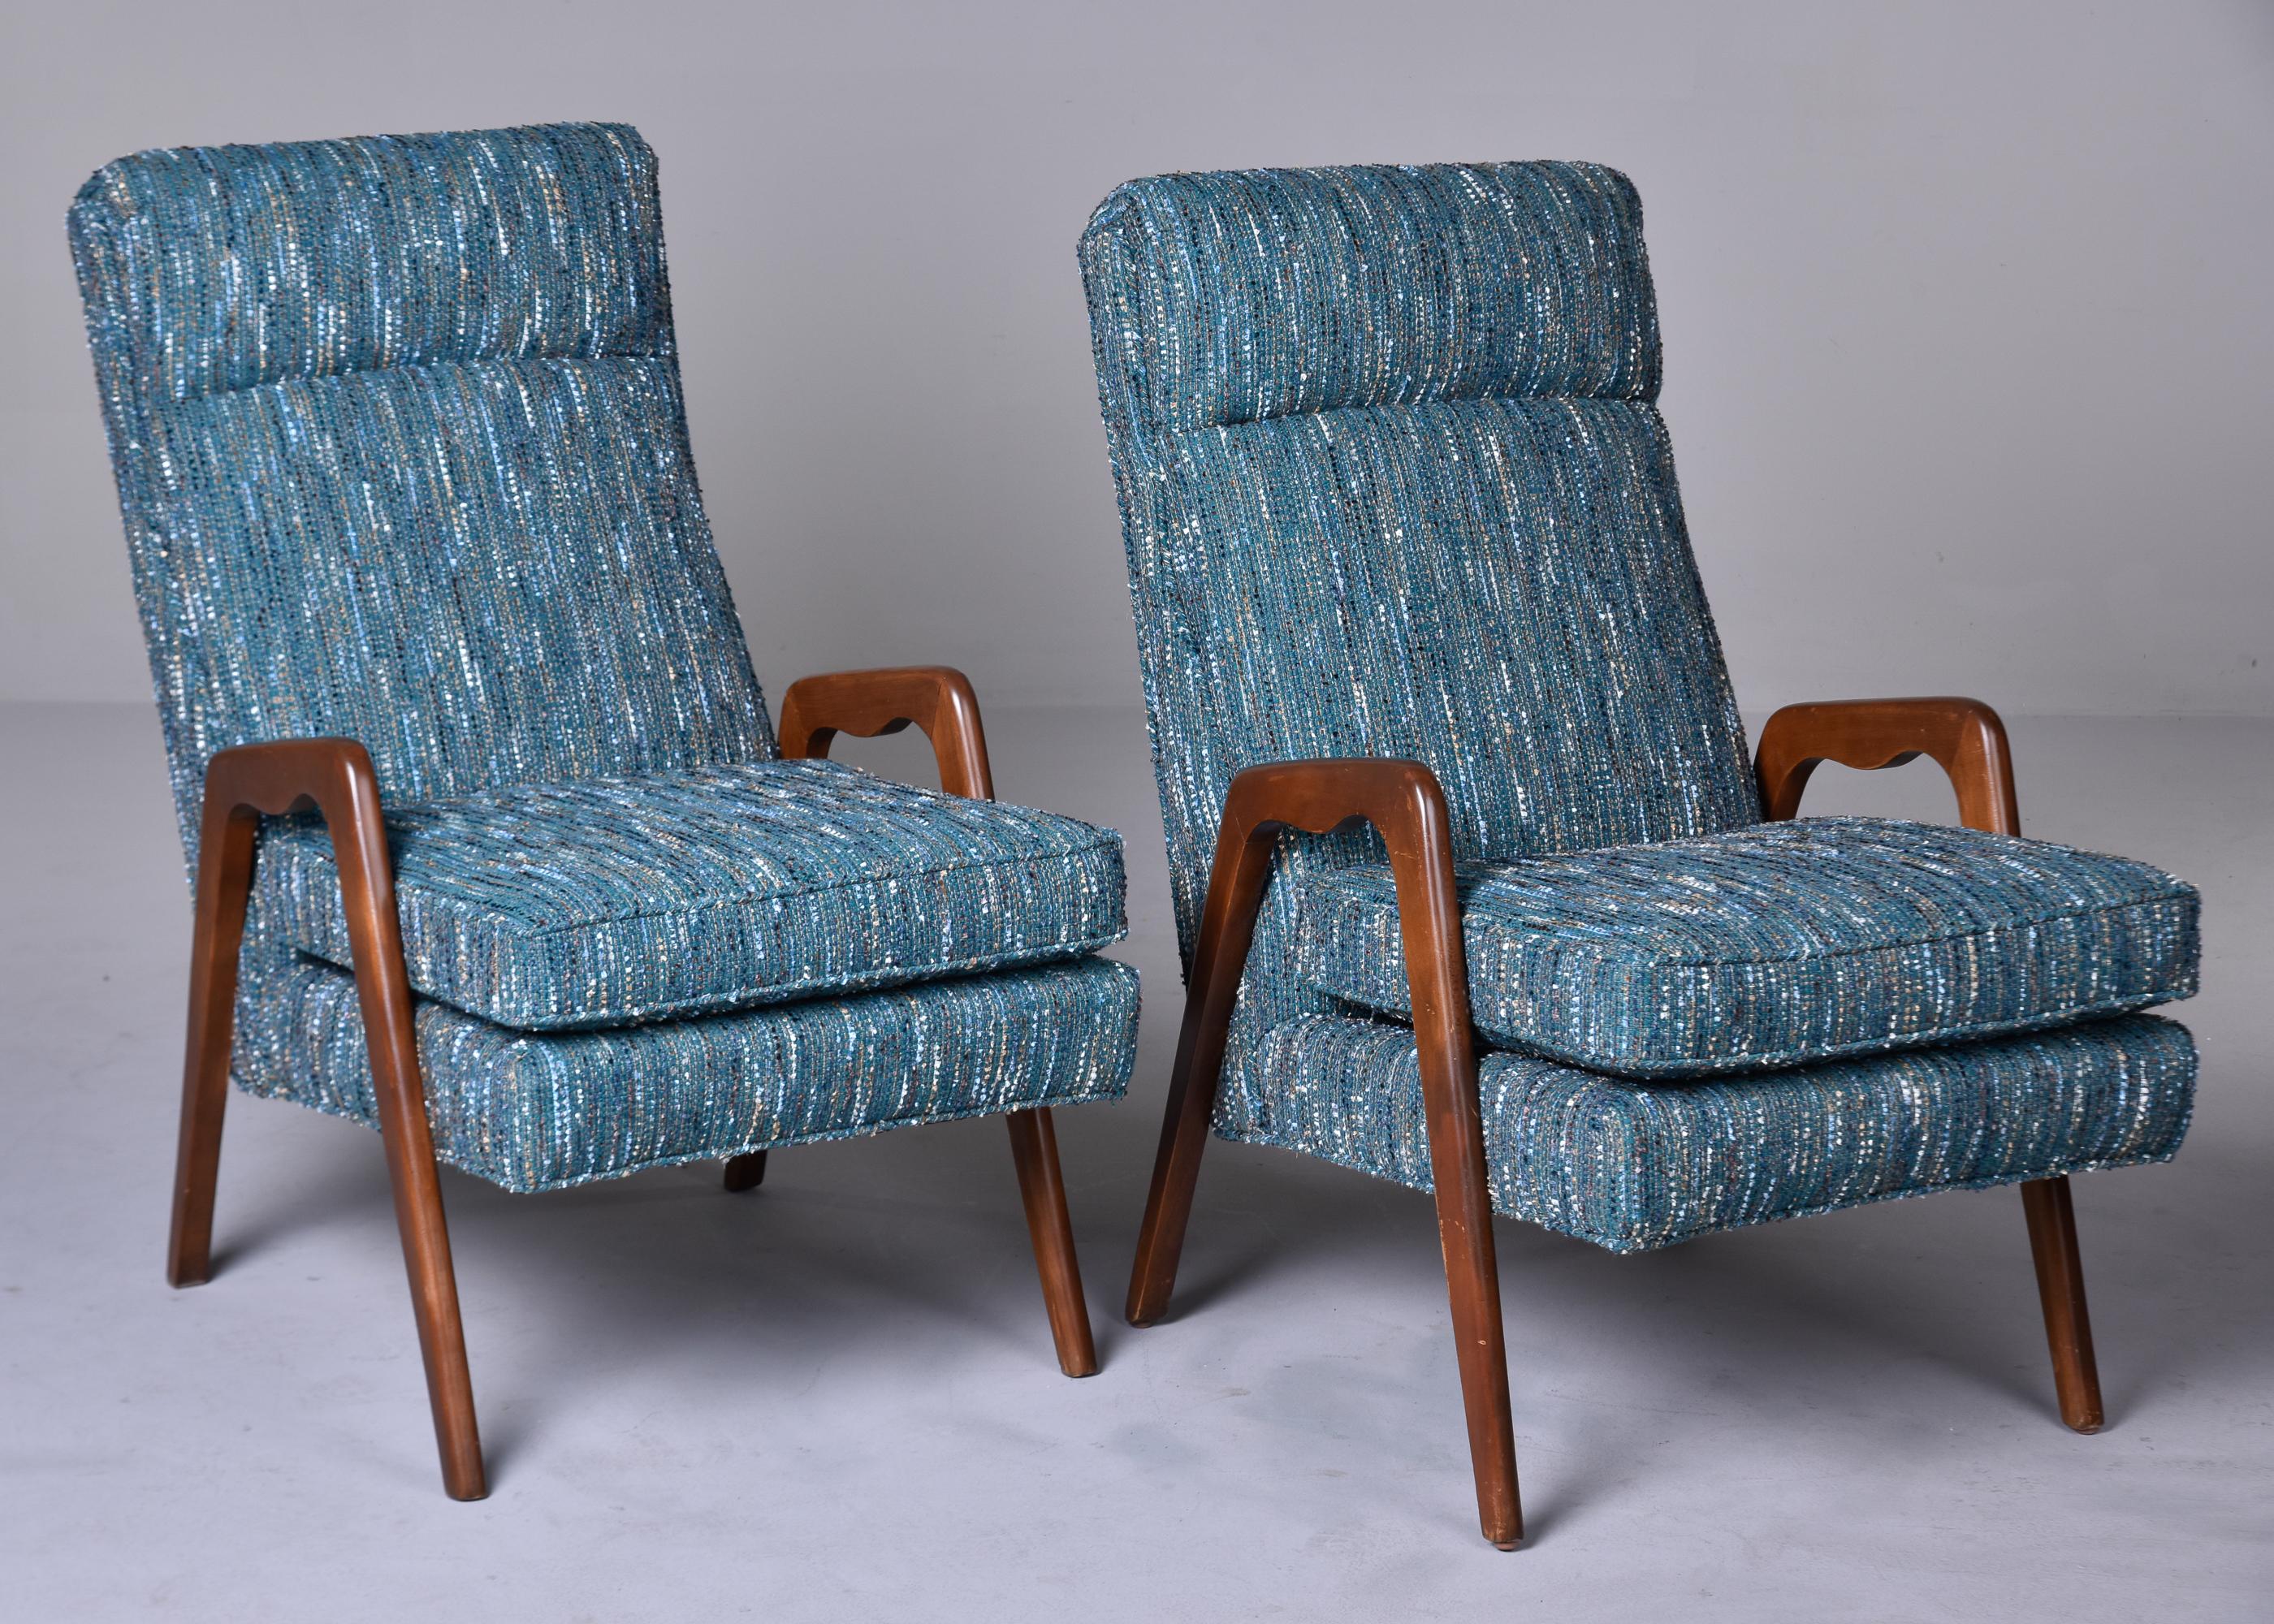 Pair of Mid-Century Italian Chairs with New Teal Tweed Upholstery For Sale 6